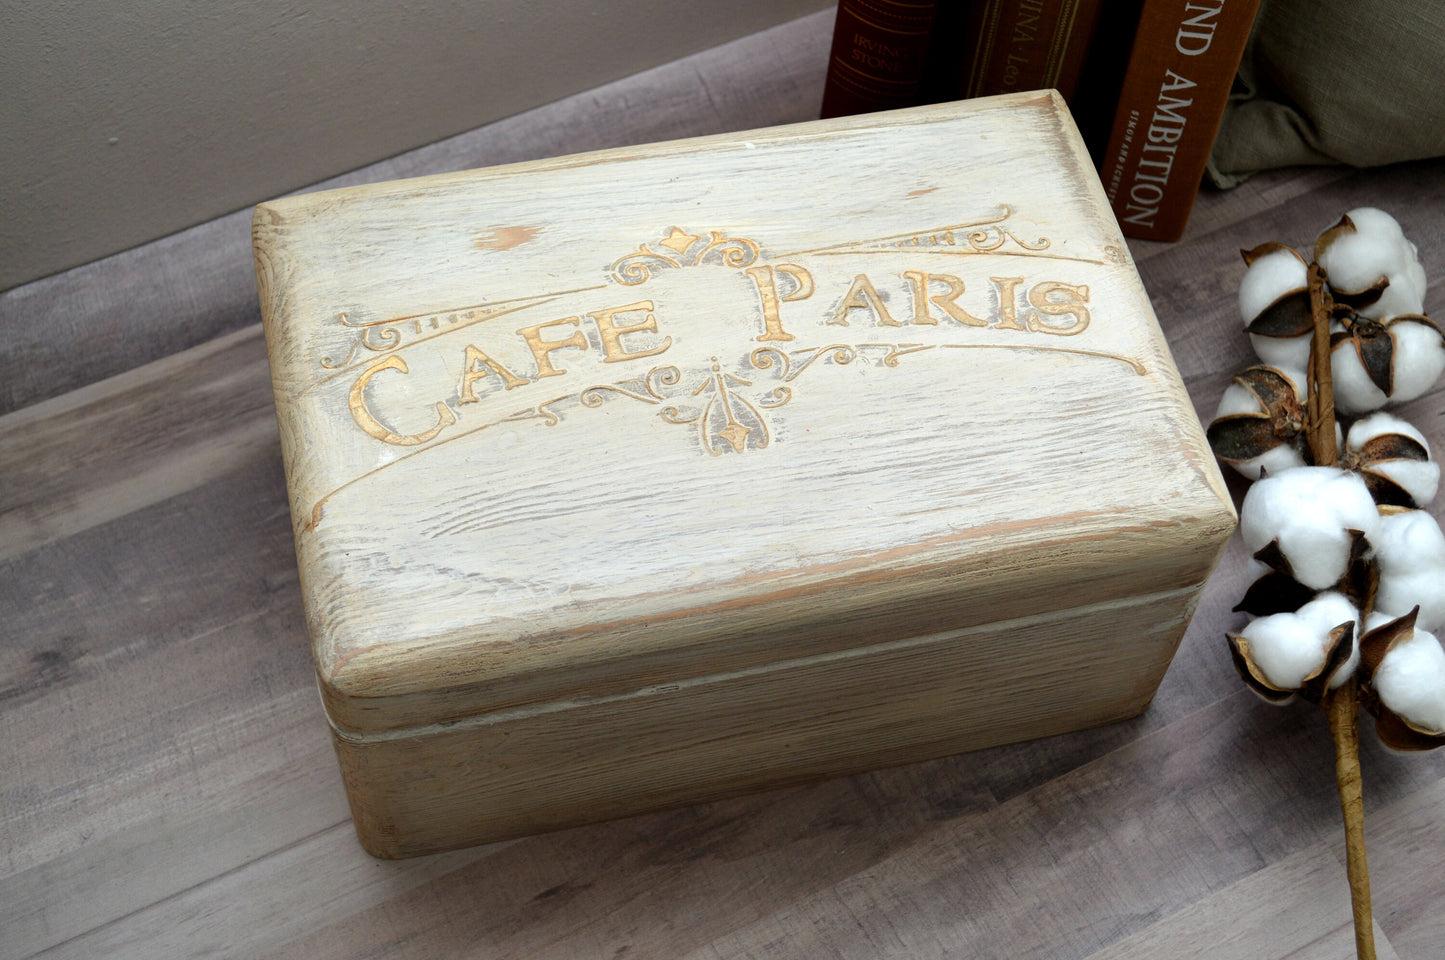 Large Rustic Wooden Box Treasure Chest, Cafe Paris Old White Storage Case Colonial Photo box Gift for her Memory Capsule Gift Home decor box